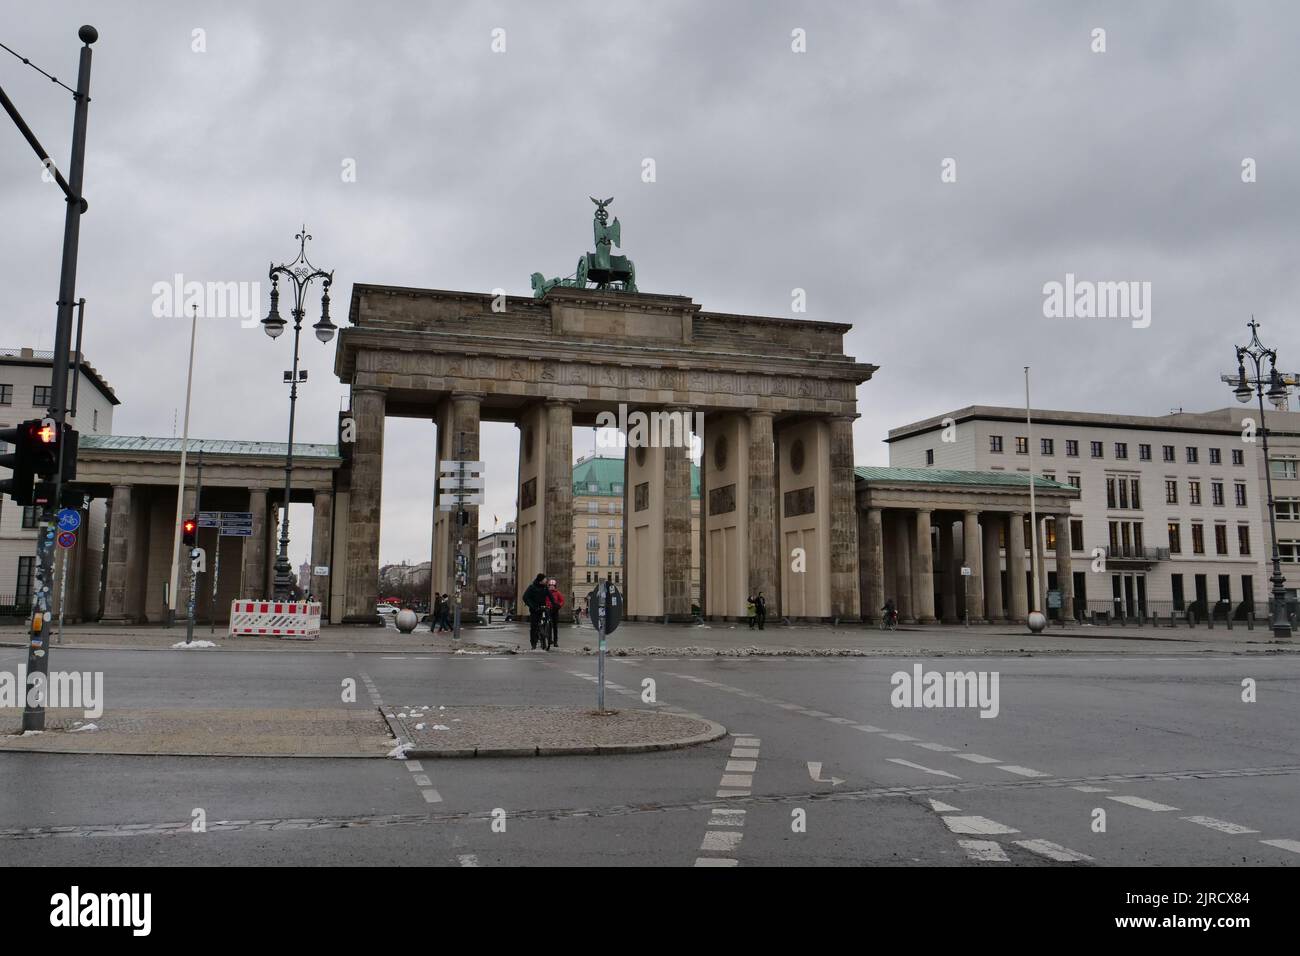 The nearly empty Brandenburger Gate during Covid-19 lockdown in Berlin, Germany Stock Photo